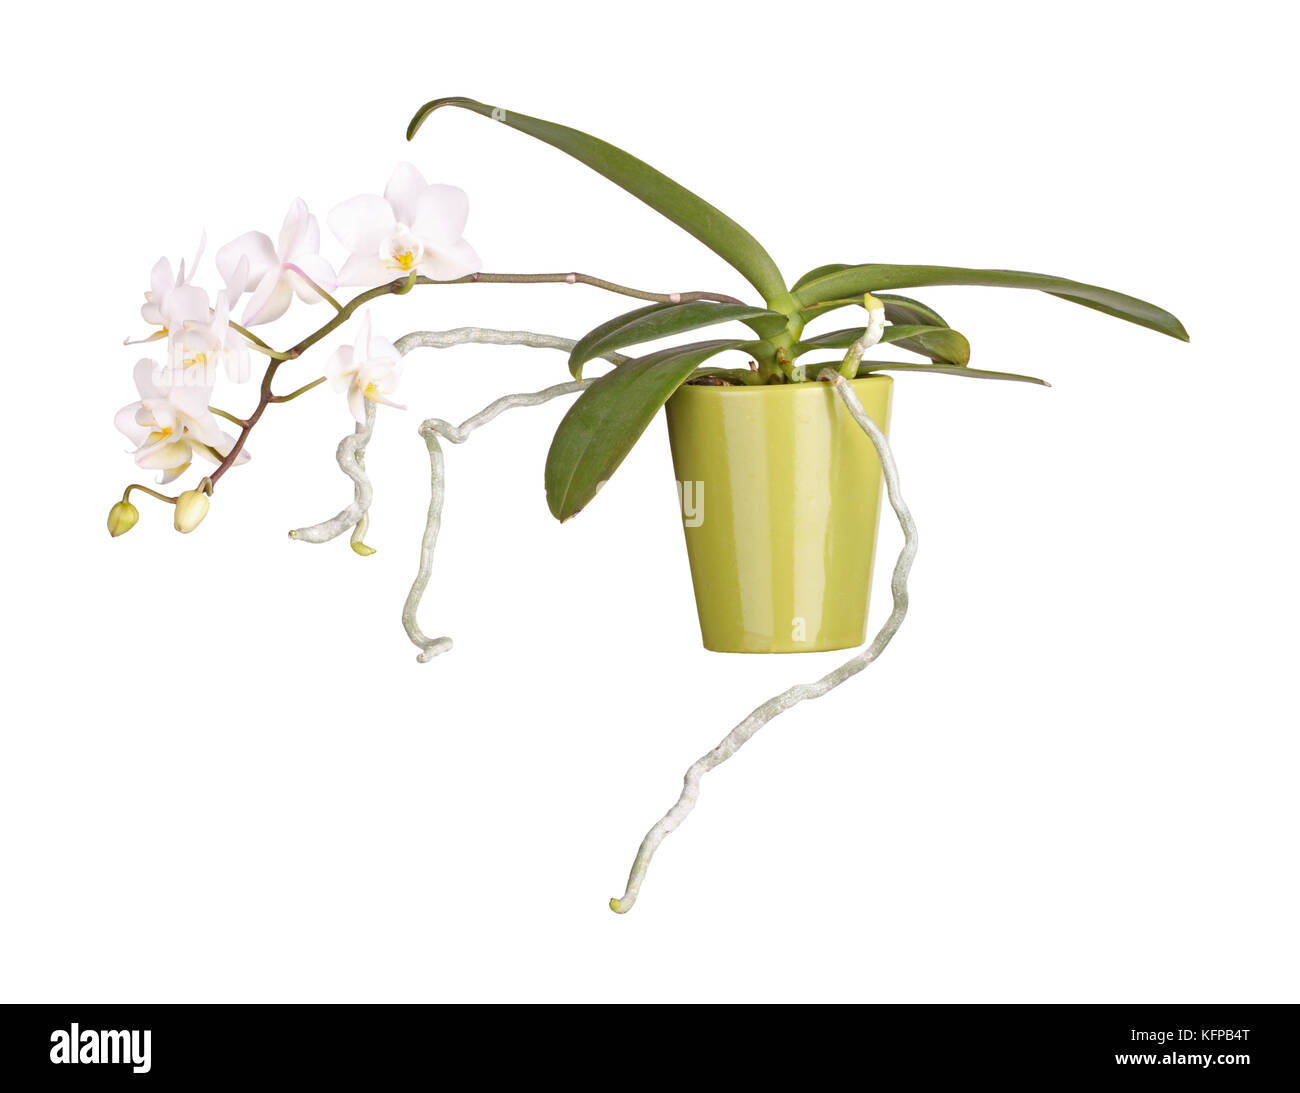 Spray of yellow and white flowers on a Phalaenopsis orchid plant and aerial roots growing in a green clay pot isolated against a white background Stock Photo